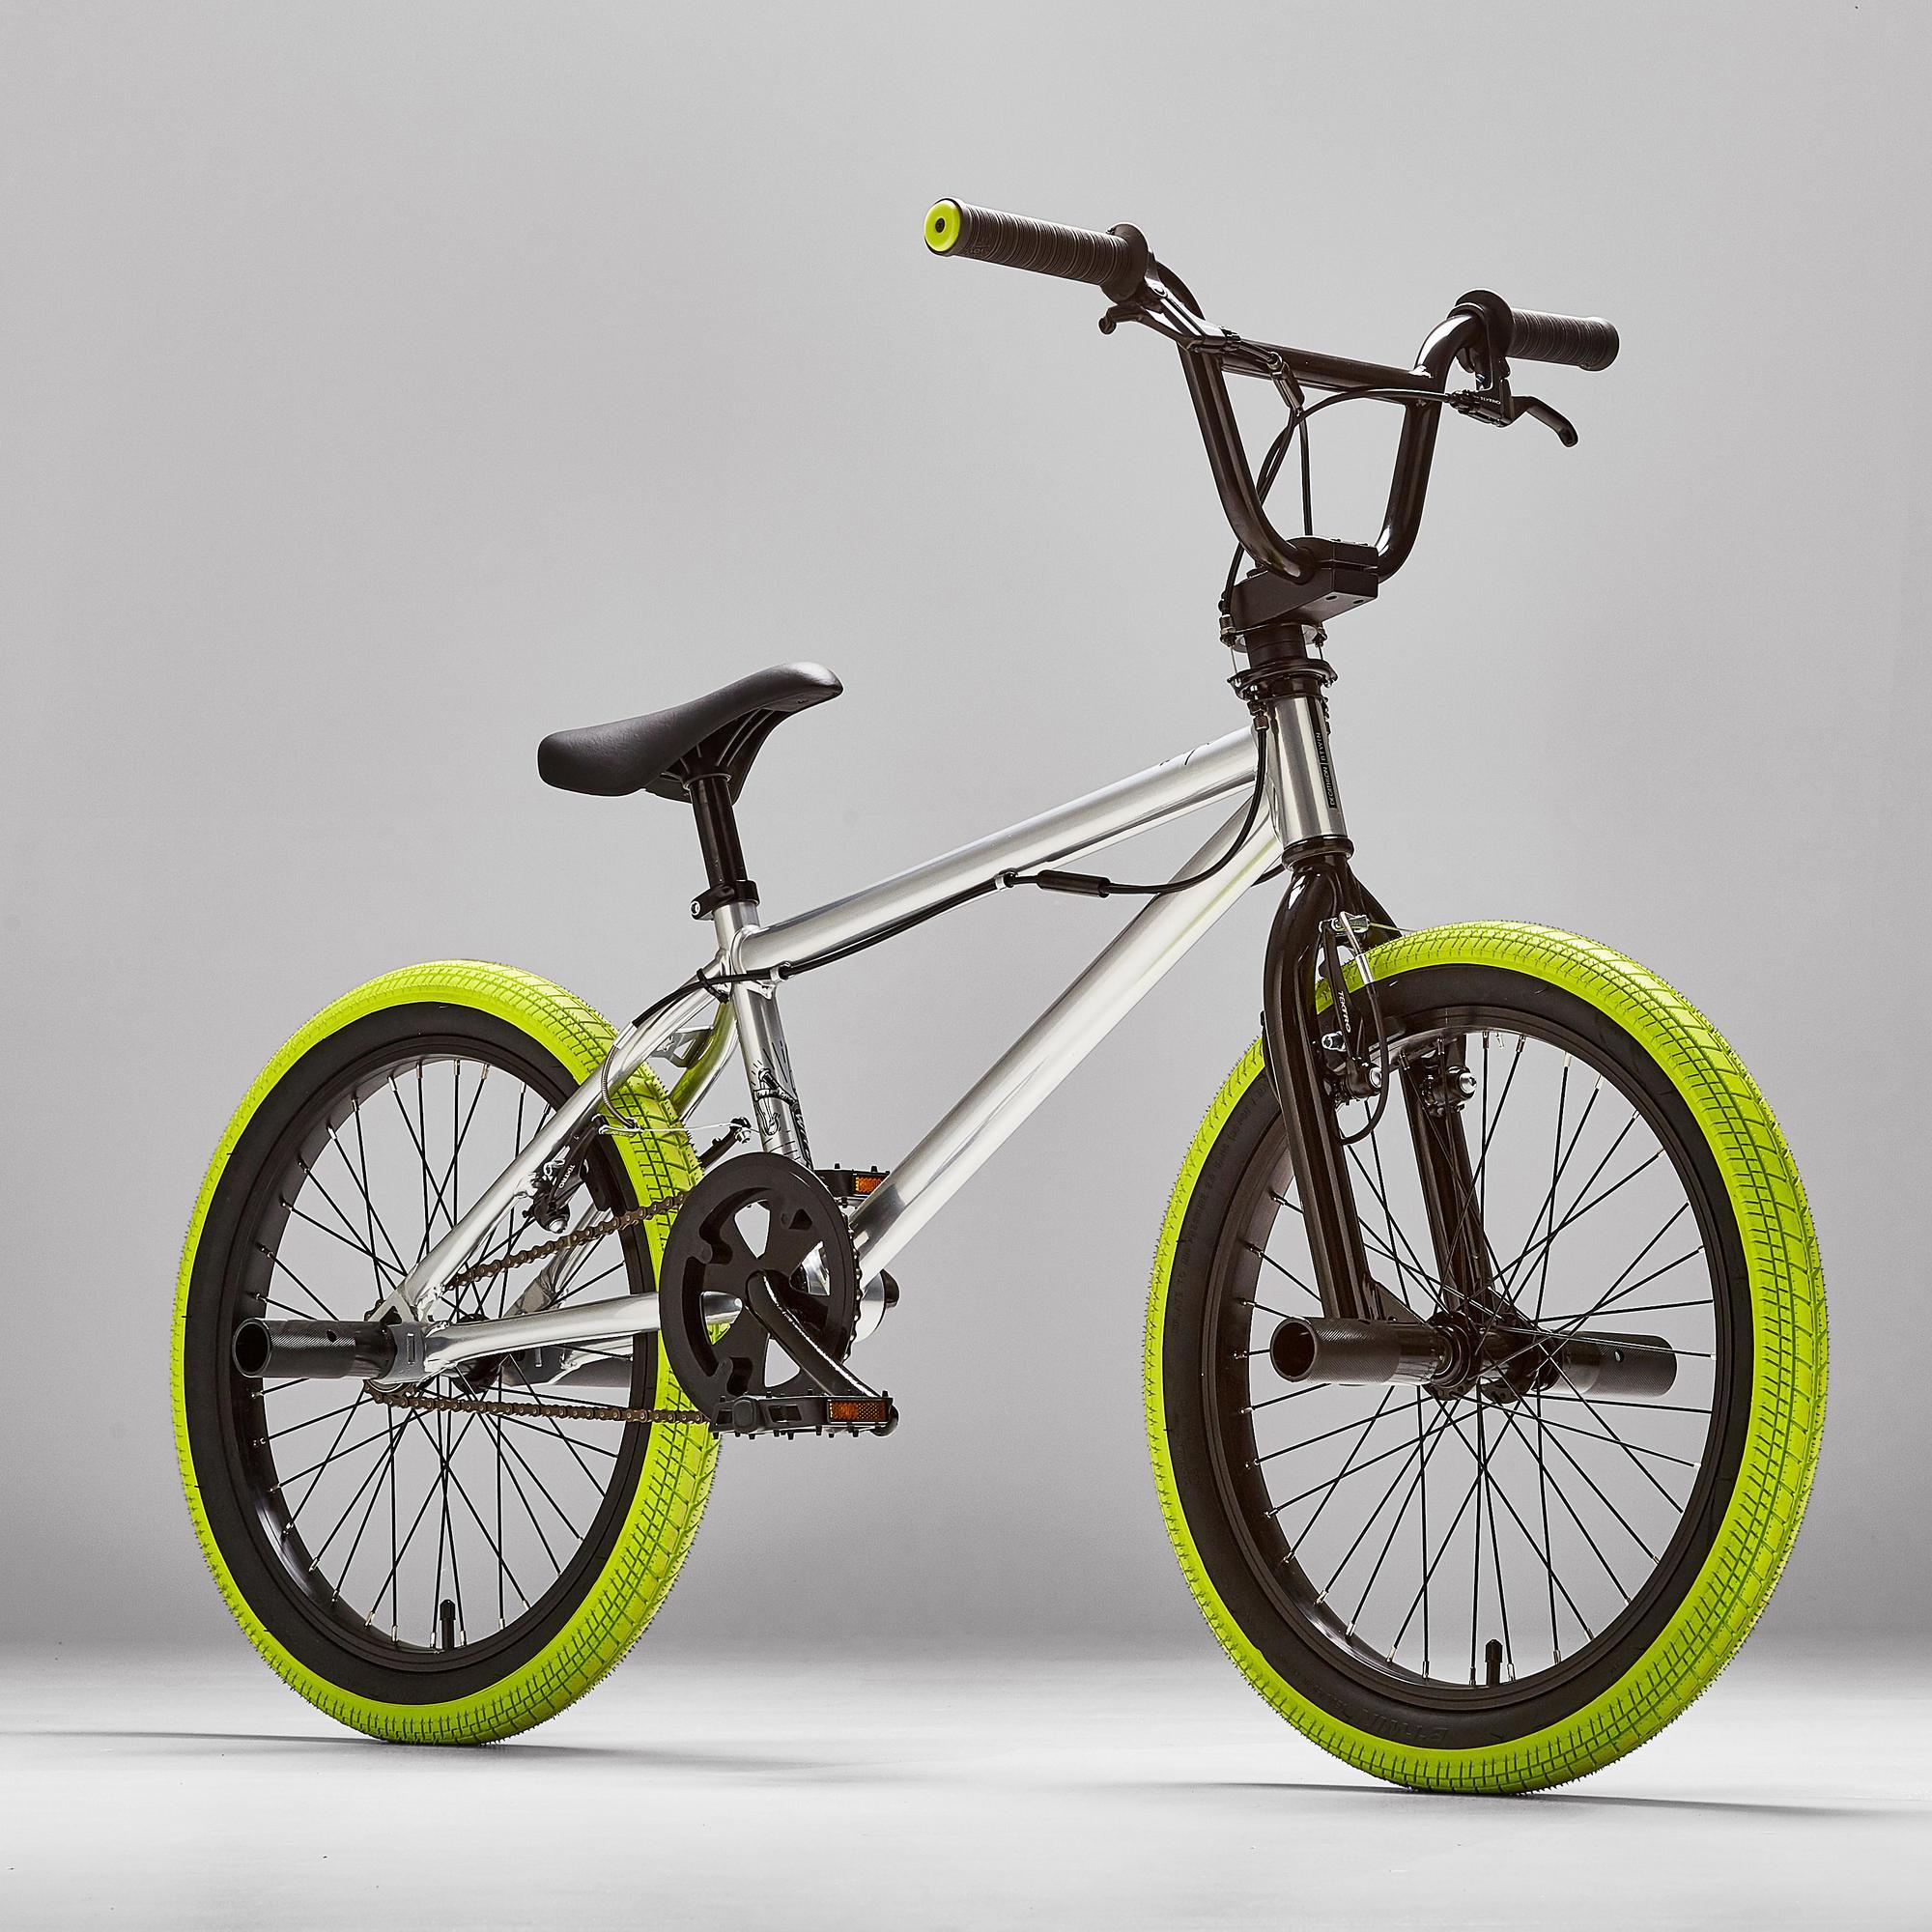 btwin bmx cycles